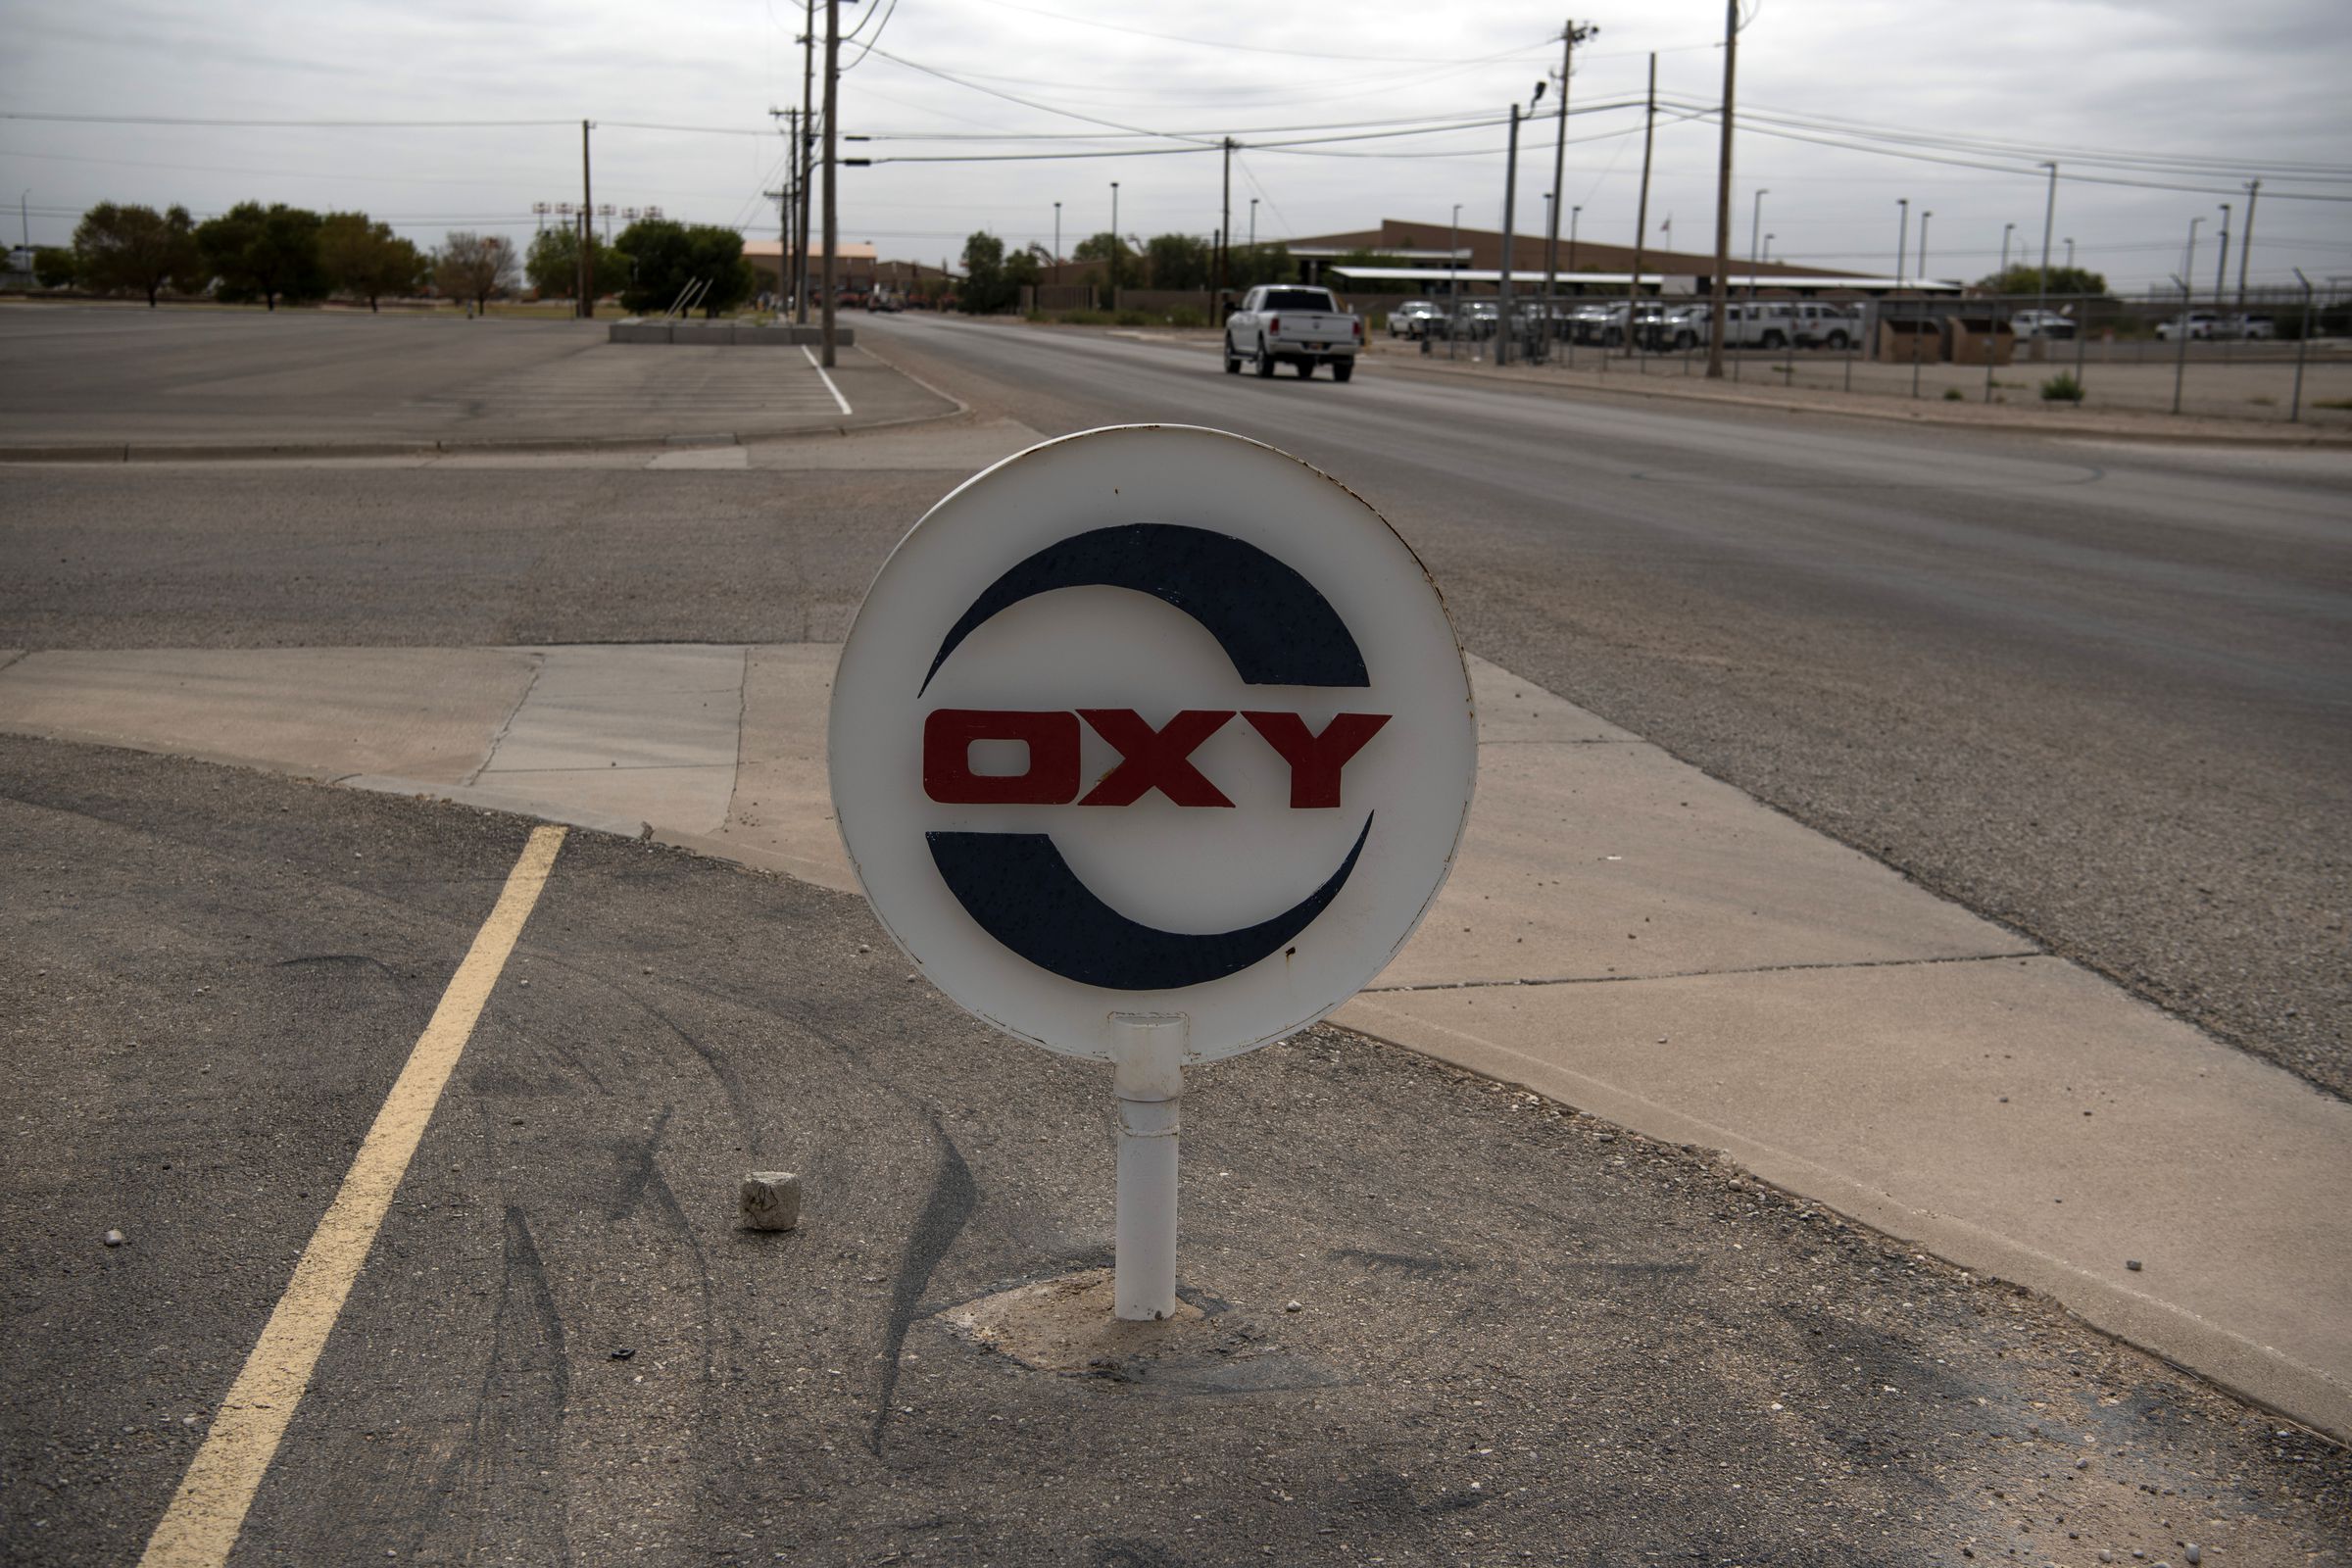 A sign on the road that says “Oxy”